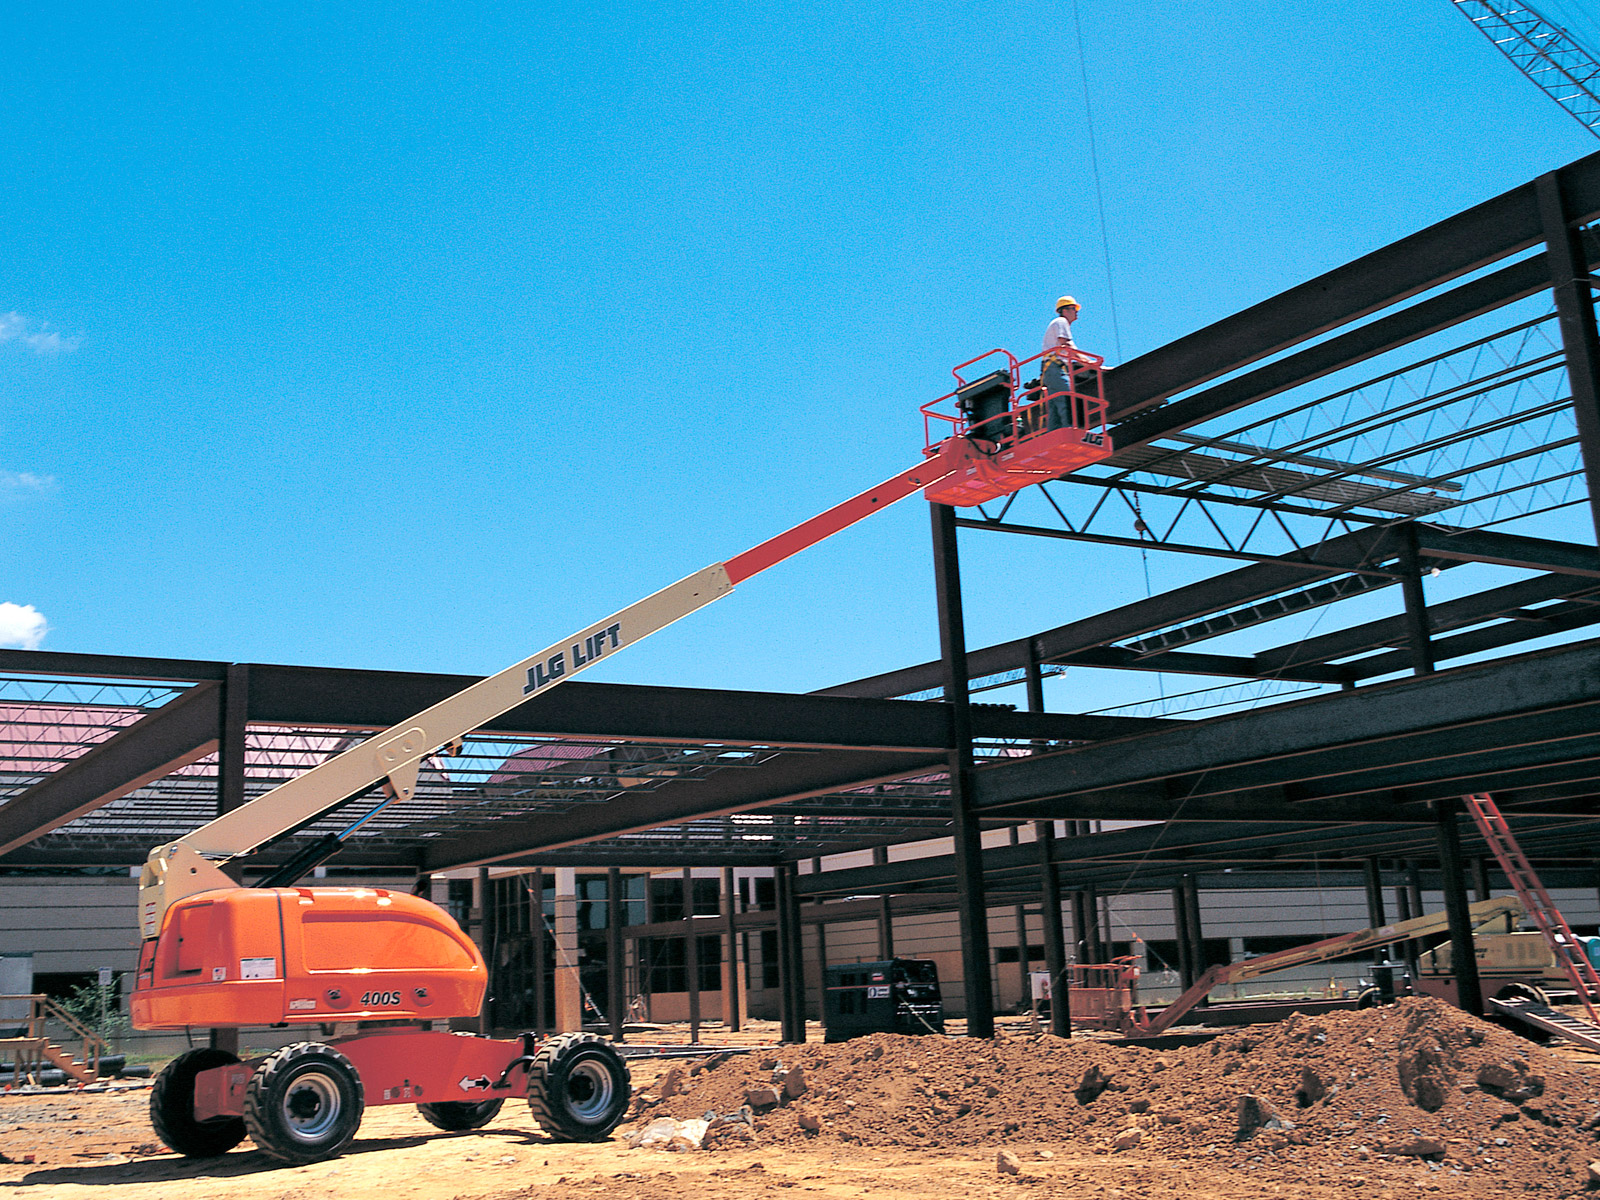 JLG 400S in action